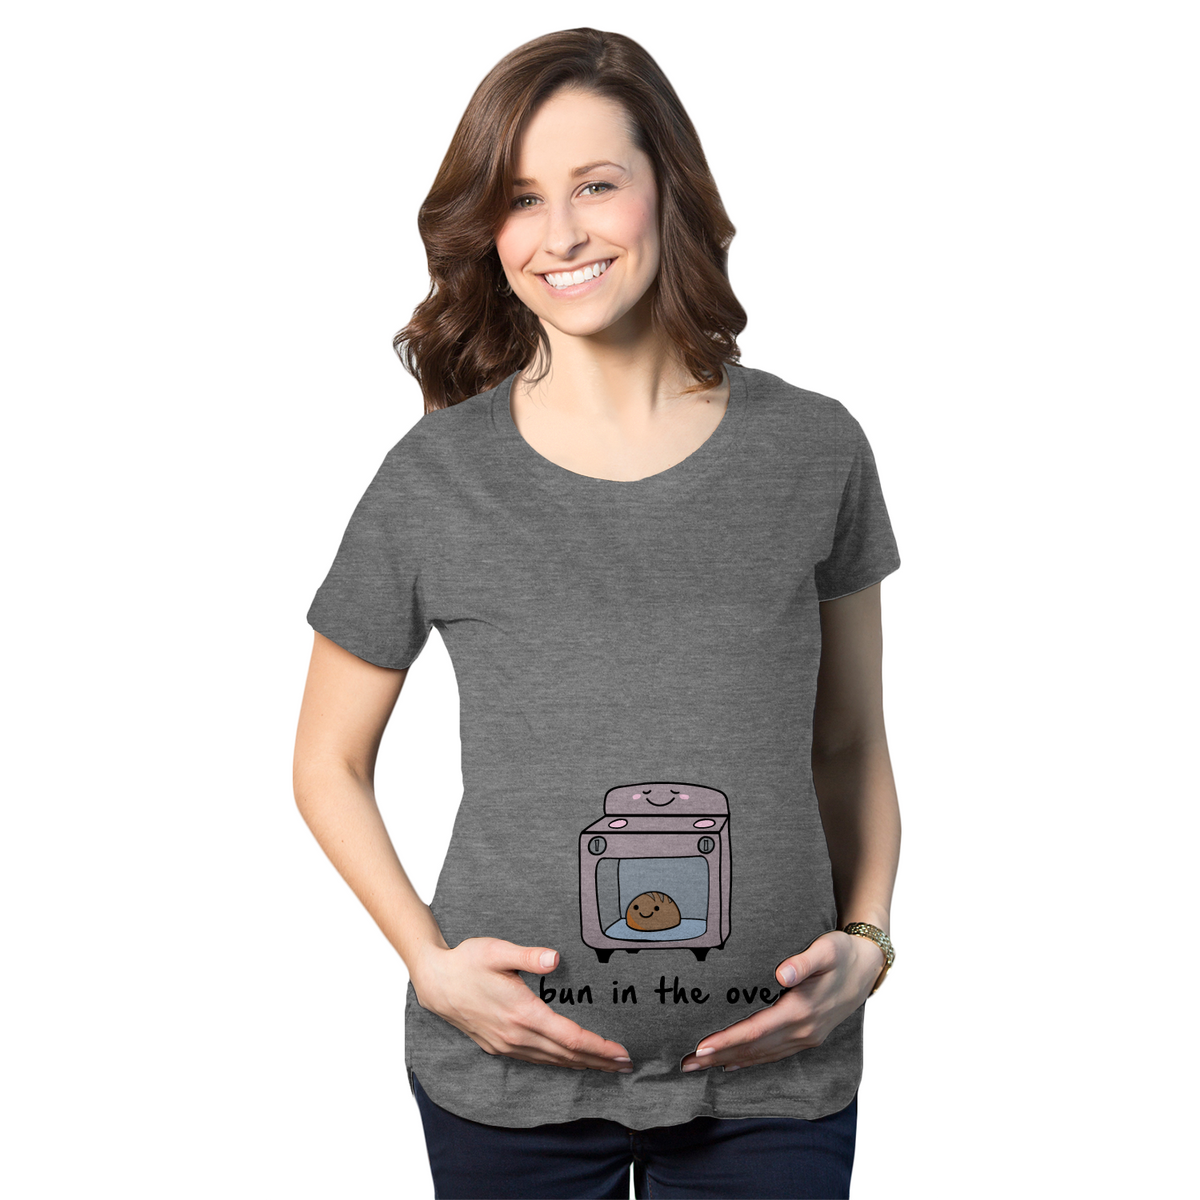 Funny Bun In The Oven Maternity T Shirt Nerdy Food Tee